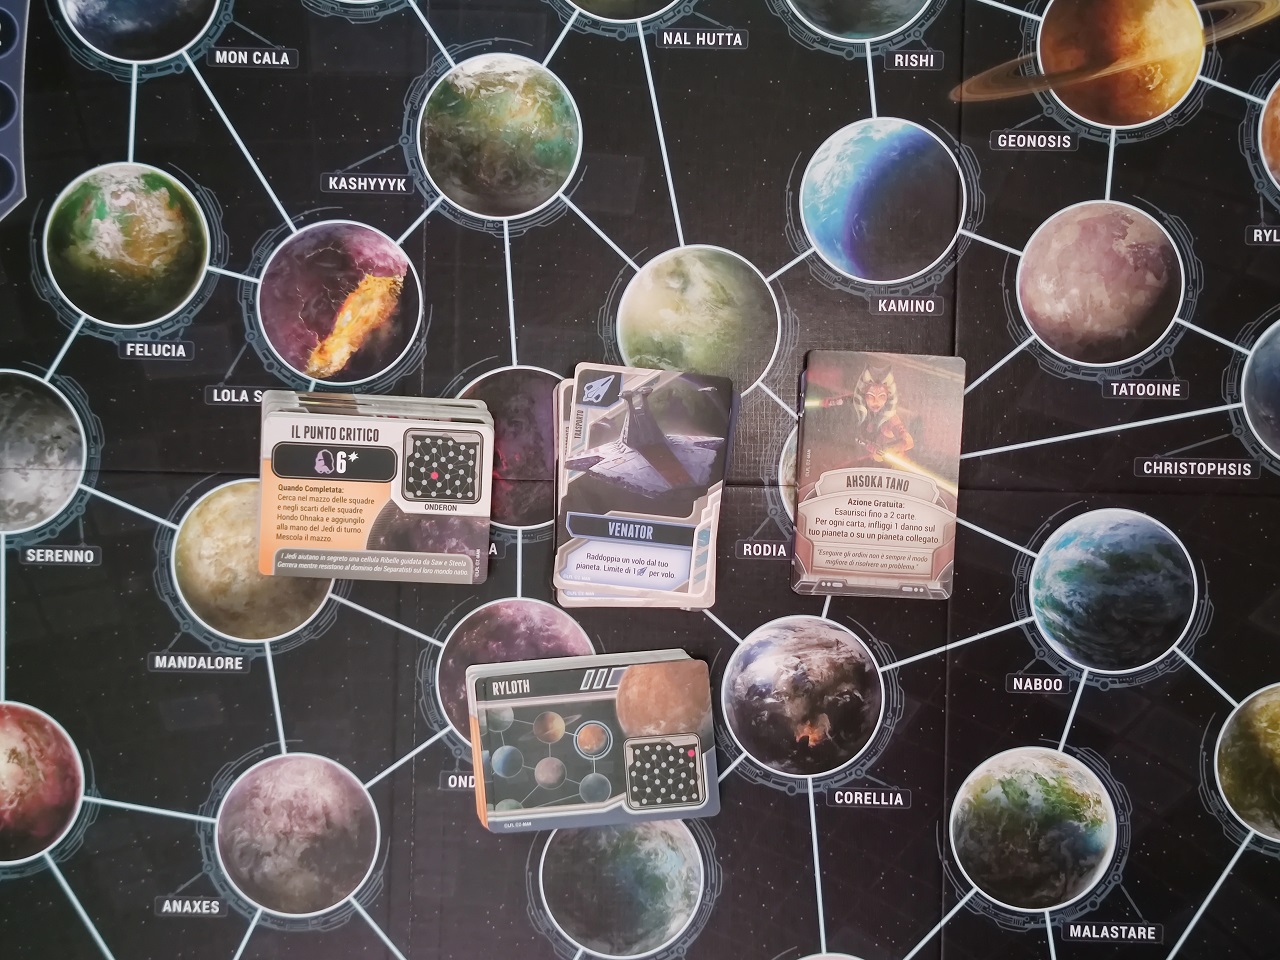 Star Wars: The Clone Wars Pandemic System